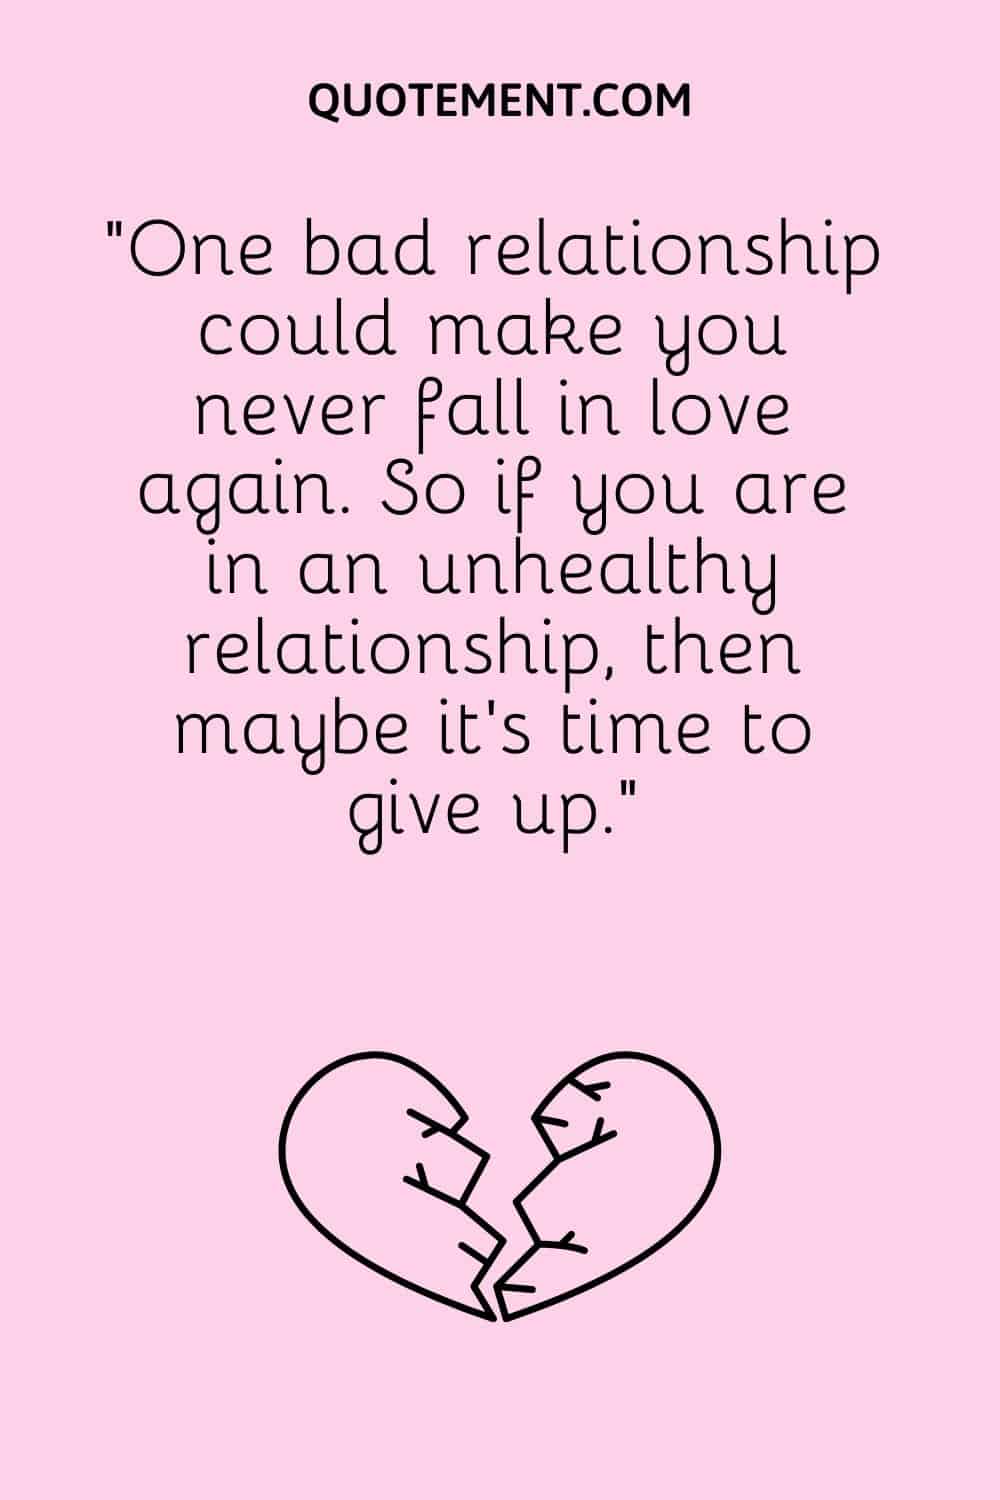 “One bad relationship could make you never fall in love again. So if you are in an unhealthy relationship, then maybe it’s time to give up.”